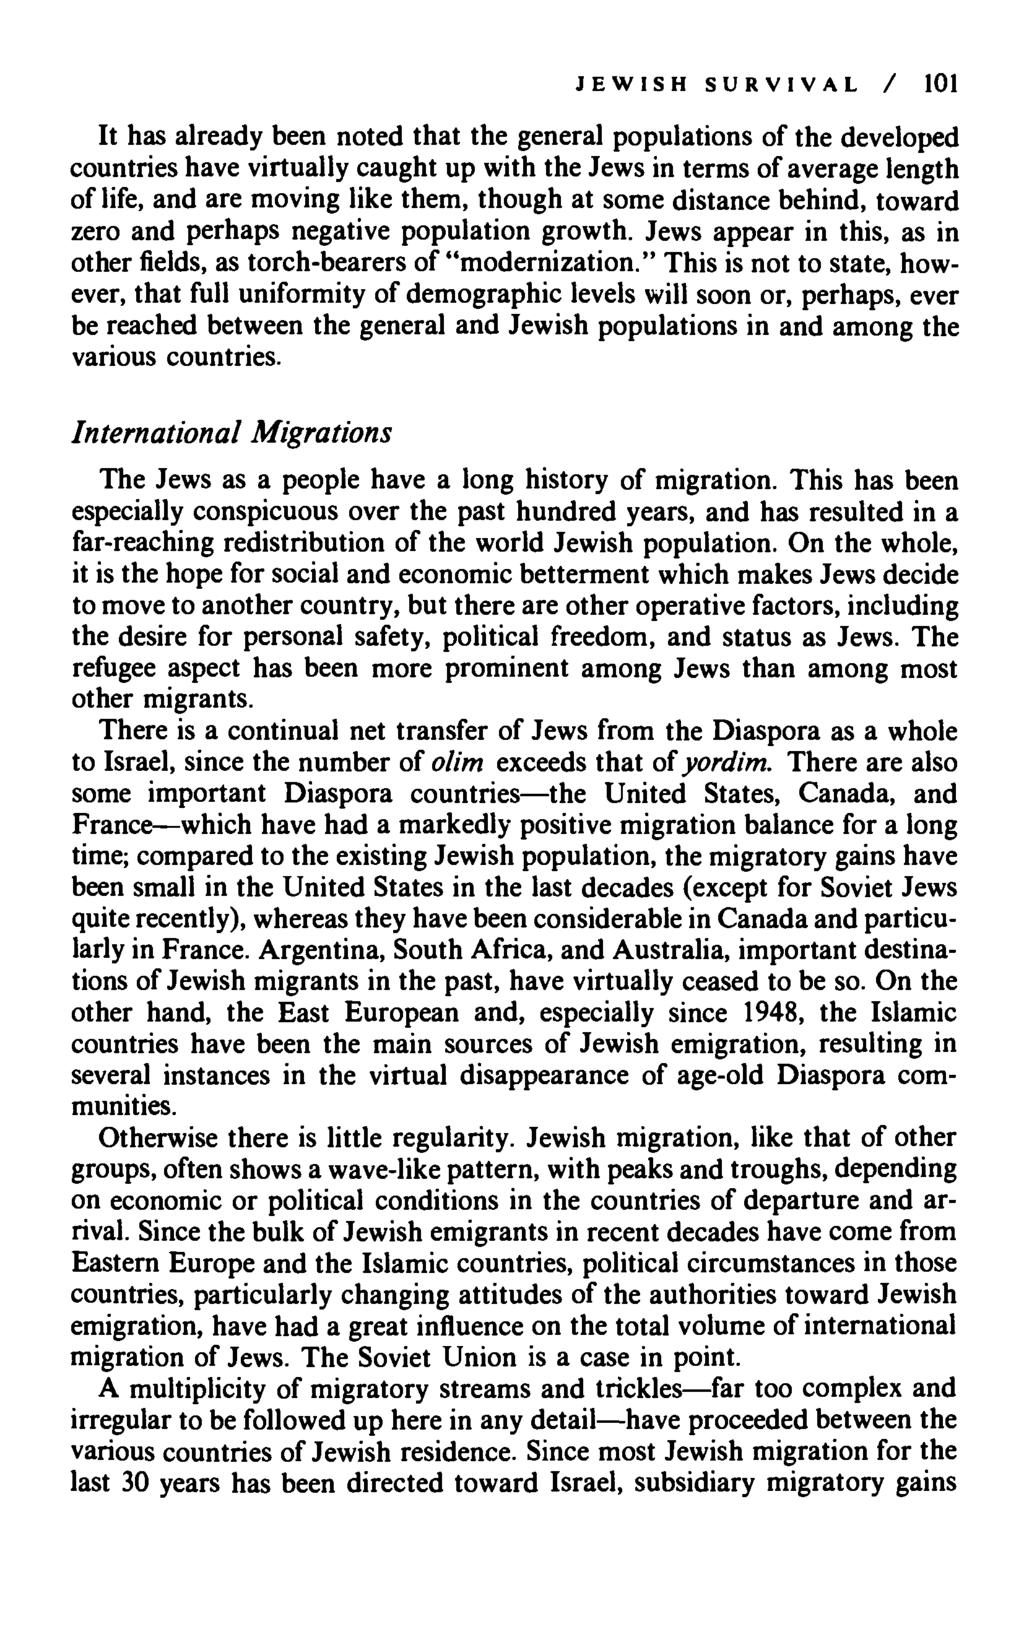 JEWISH SURVIVAL / 101 It has already been noted that the general populations of the developed countries have virtually caught up with the Jews in terms of average length of life, and are moving like